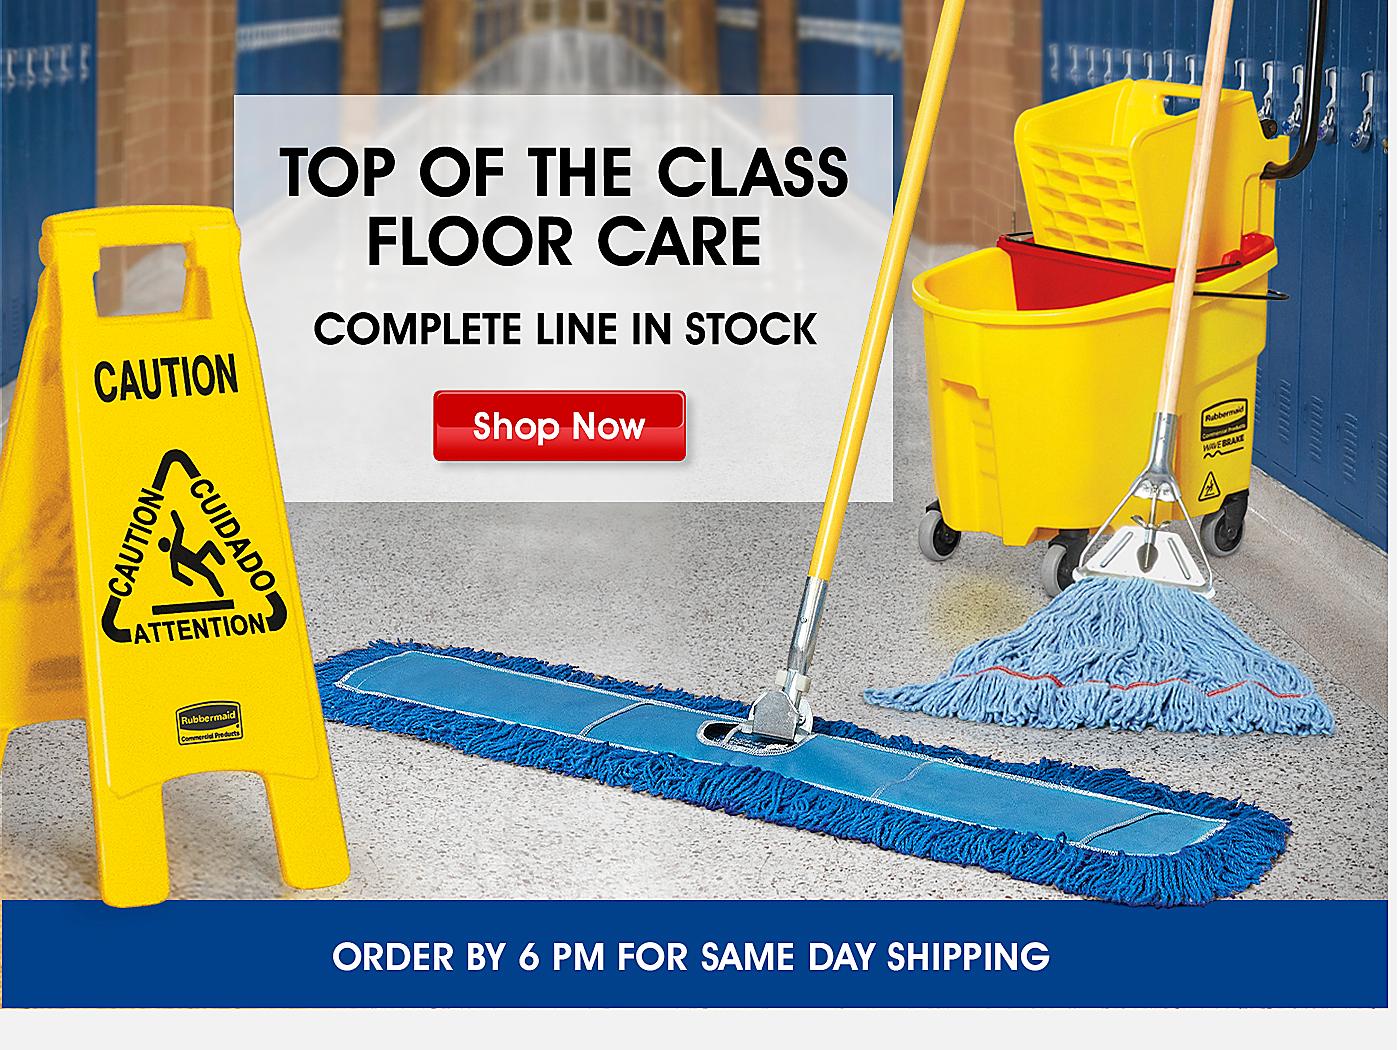 Top of the class floor care. Complete line in stock. Shop Now. ORDER BY 6 PM FOR SAME DAY SHIPPING